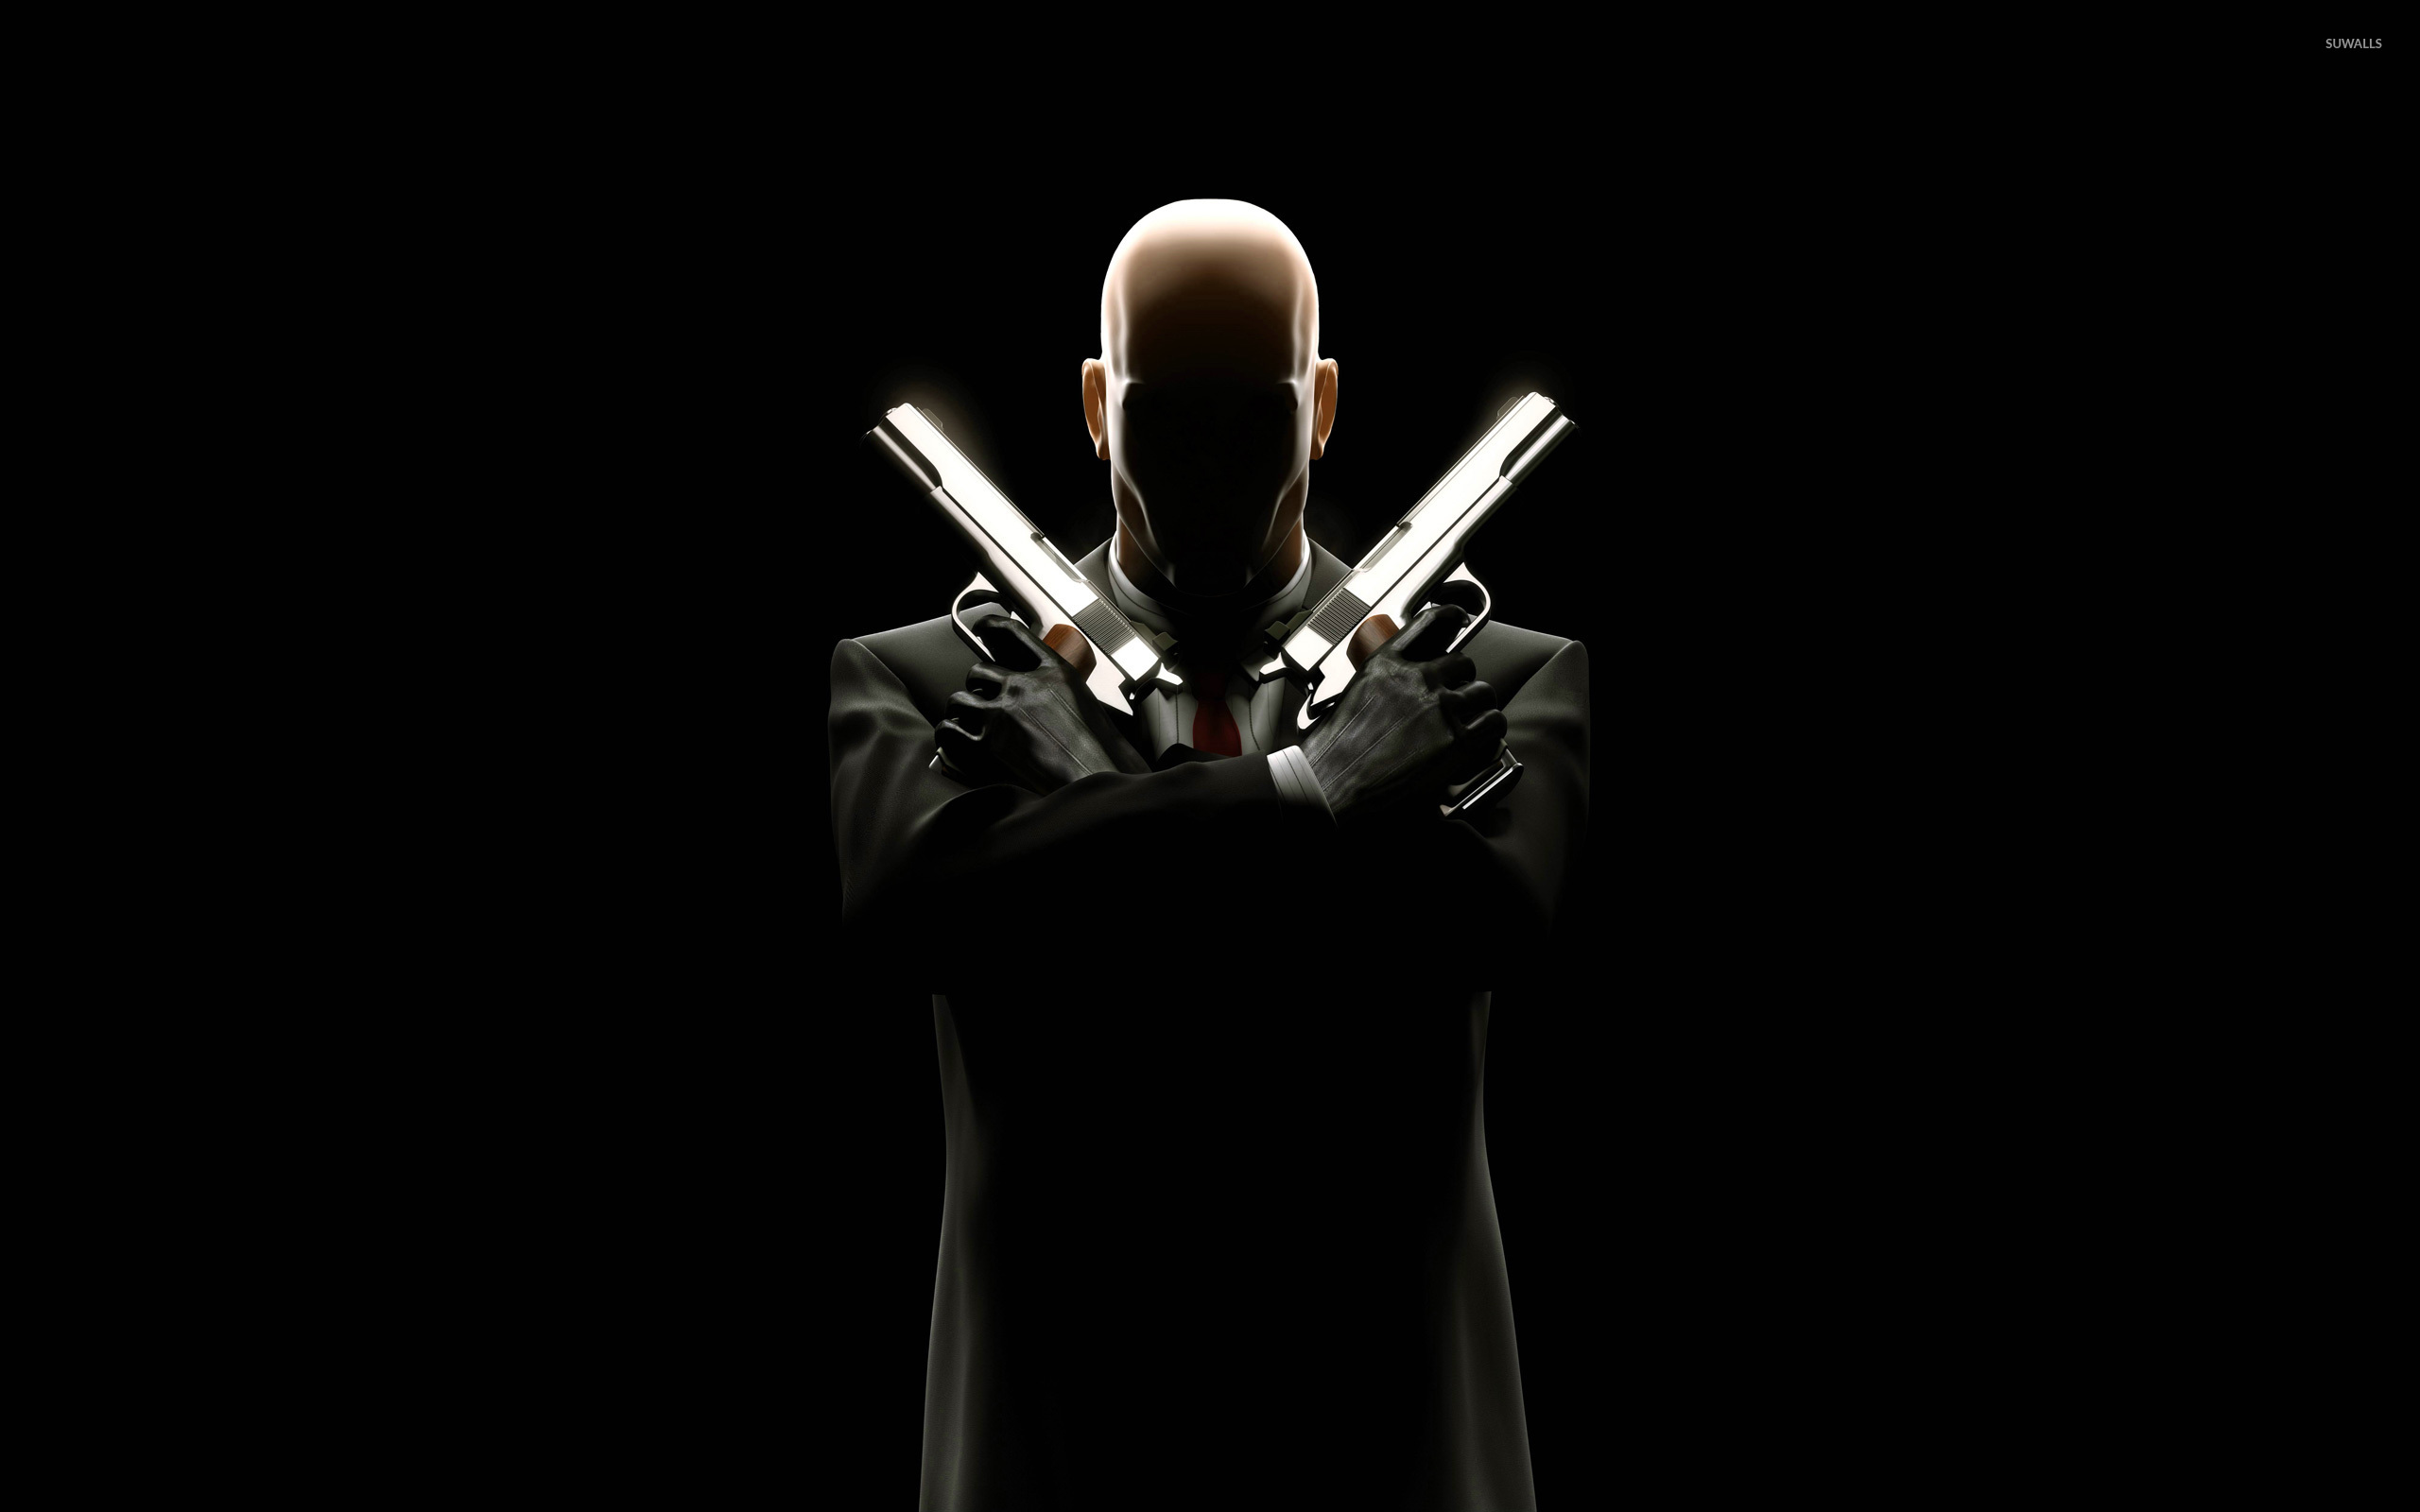 Hitman 2020 Wallpaper HD Games 4K Wallpapers Images and Background   Wallpapers Den